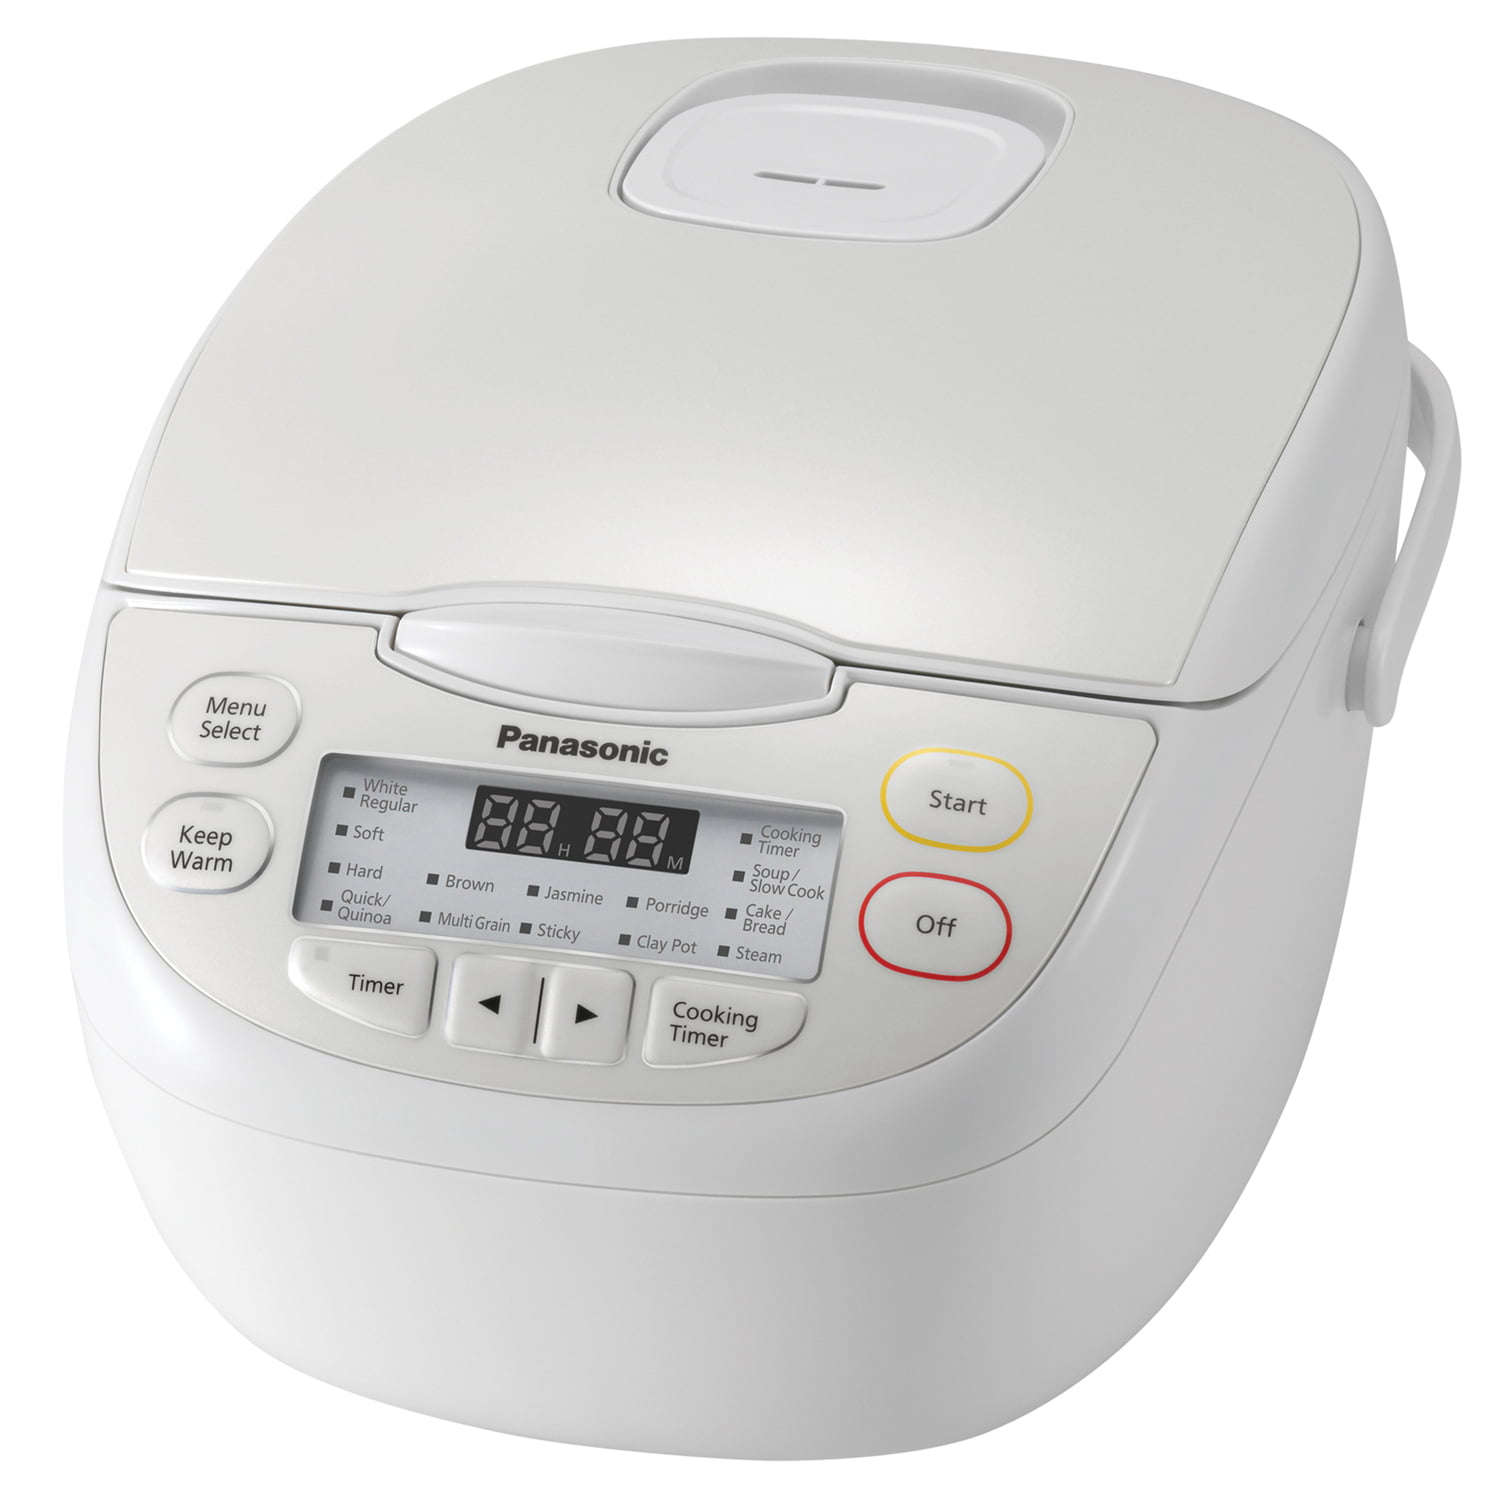 Panasonic SR-CN108 5-Cup-Uncooked Rice and Grains Multi-Cooker